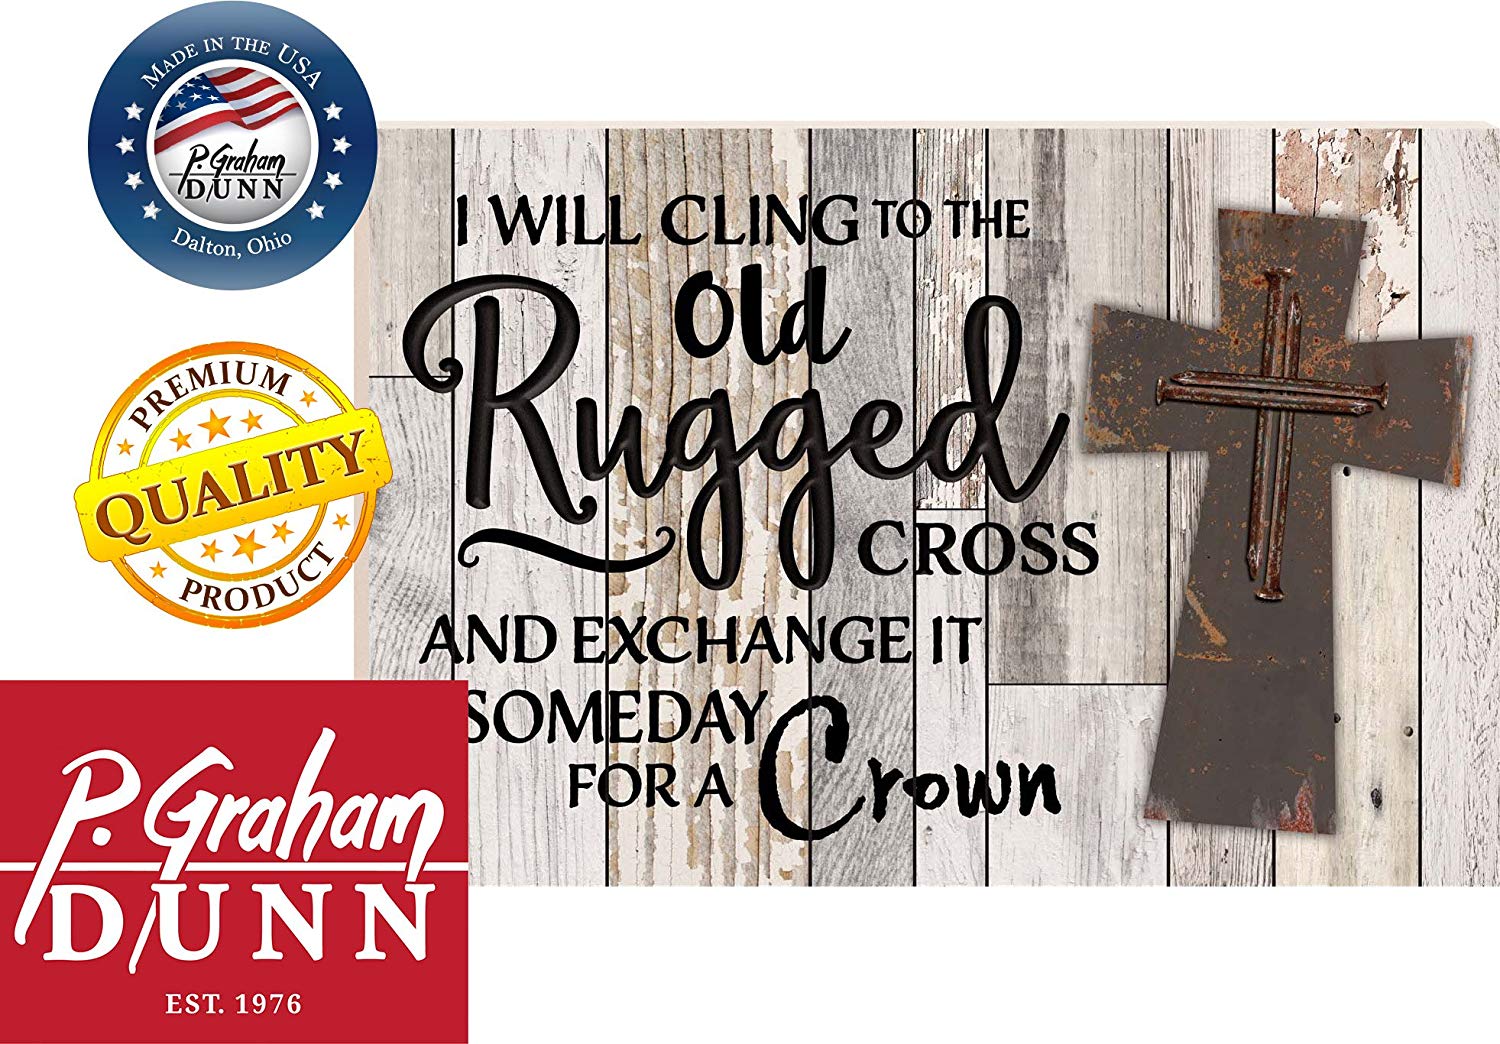 Rugged Cross Logo - Amazon.com: P. GRAHAM DUNN I Will Cling to The Old Rugged Cross 16 x ...